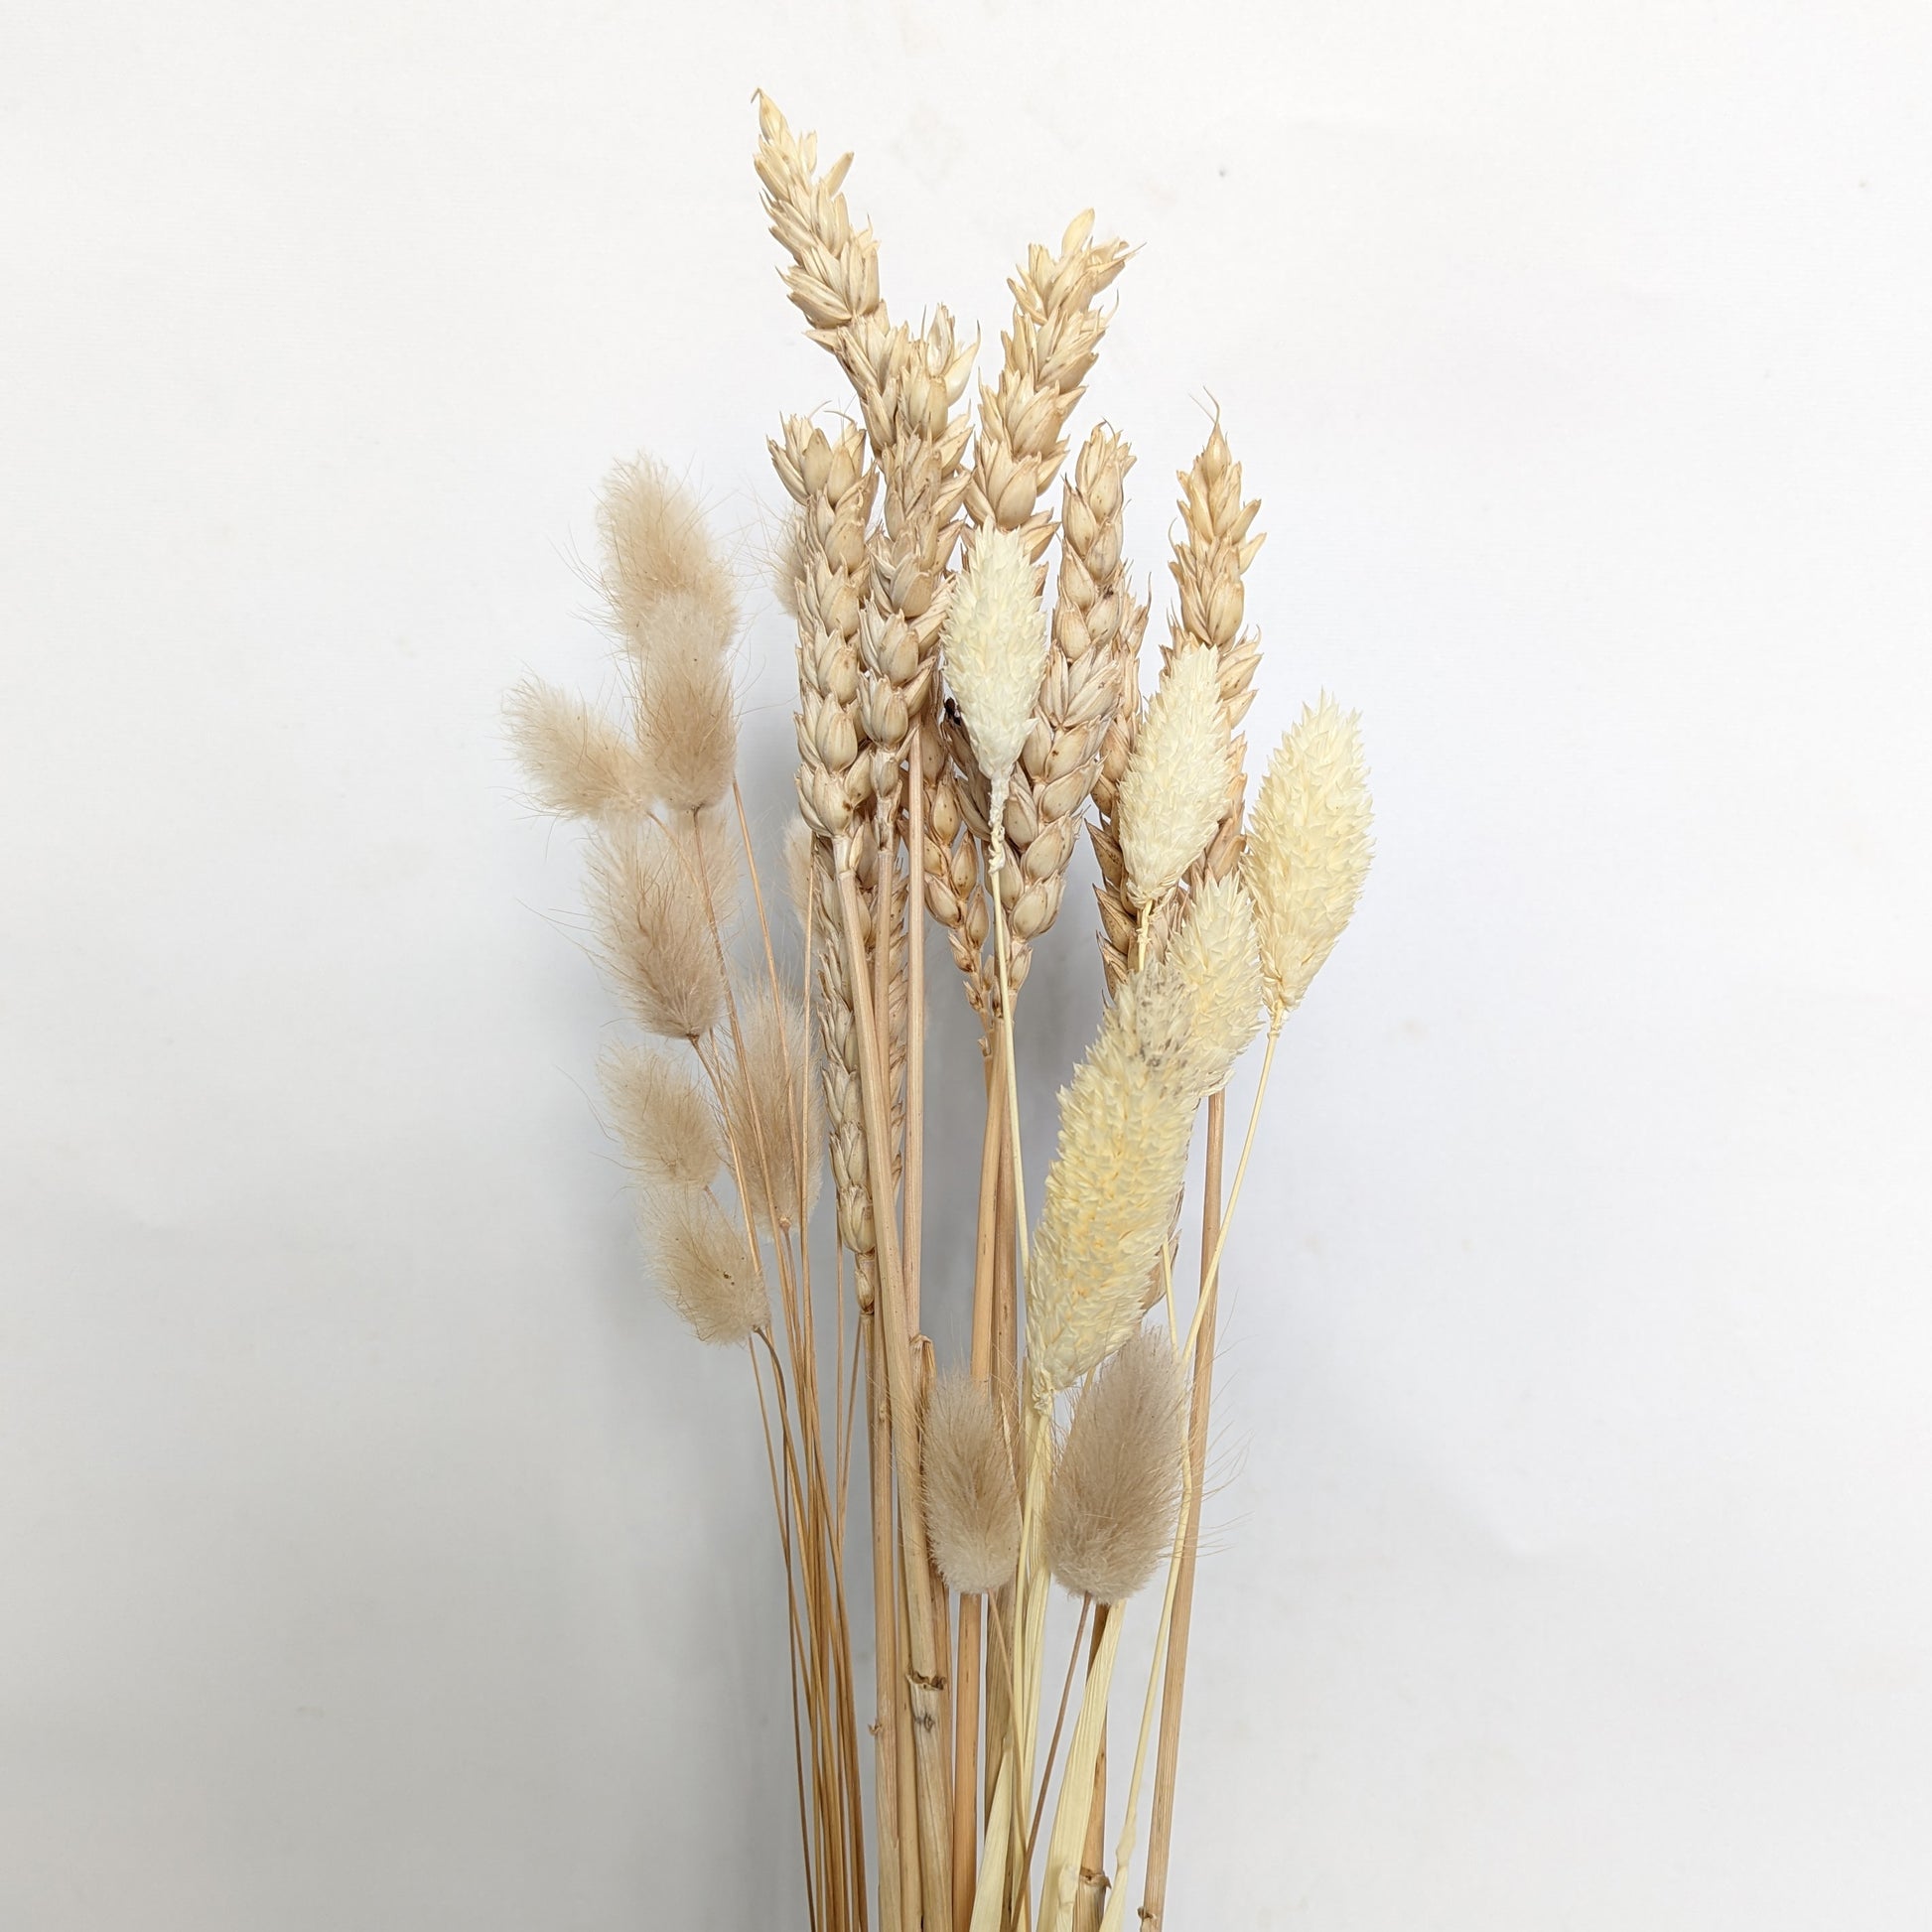 Dried Wheat & Grasses